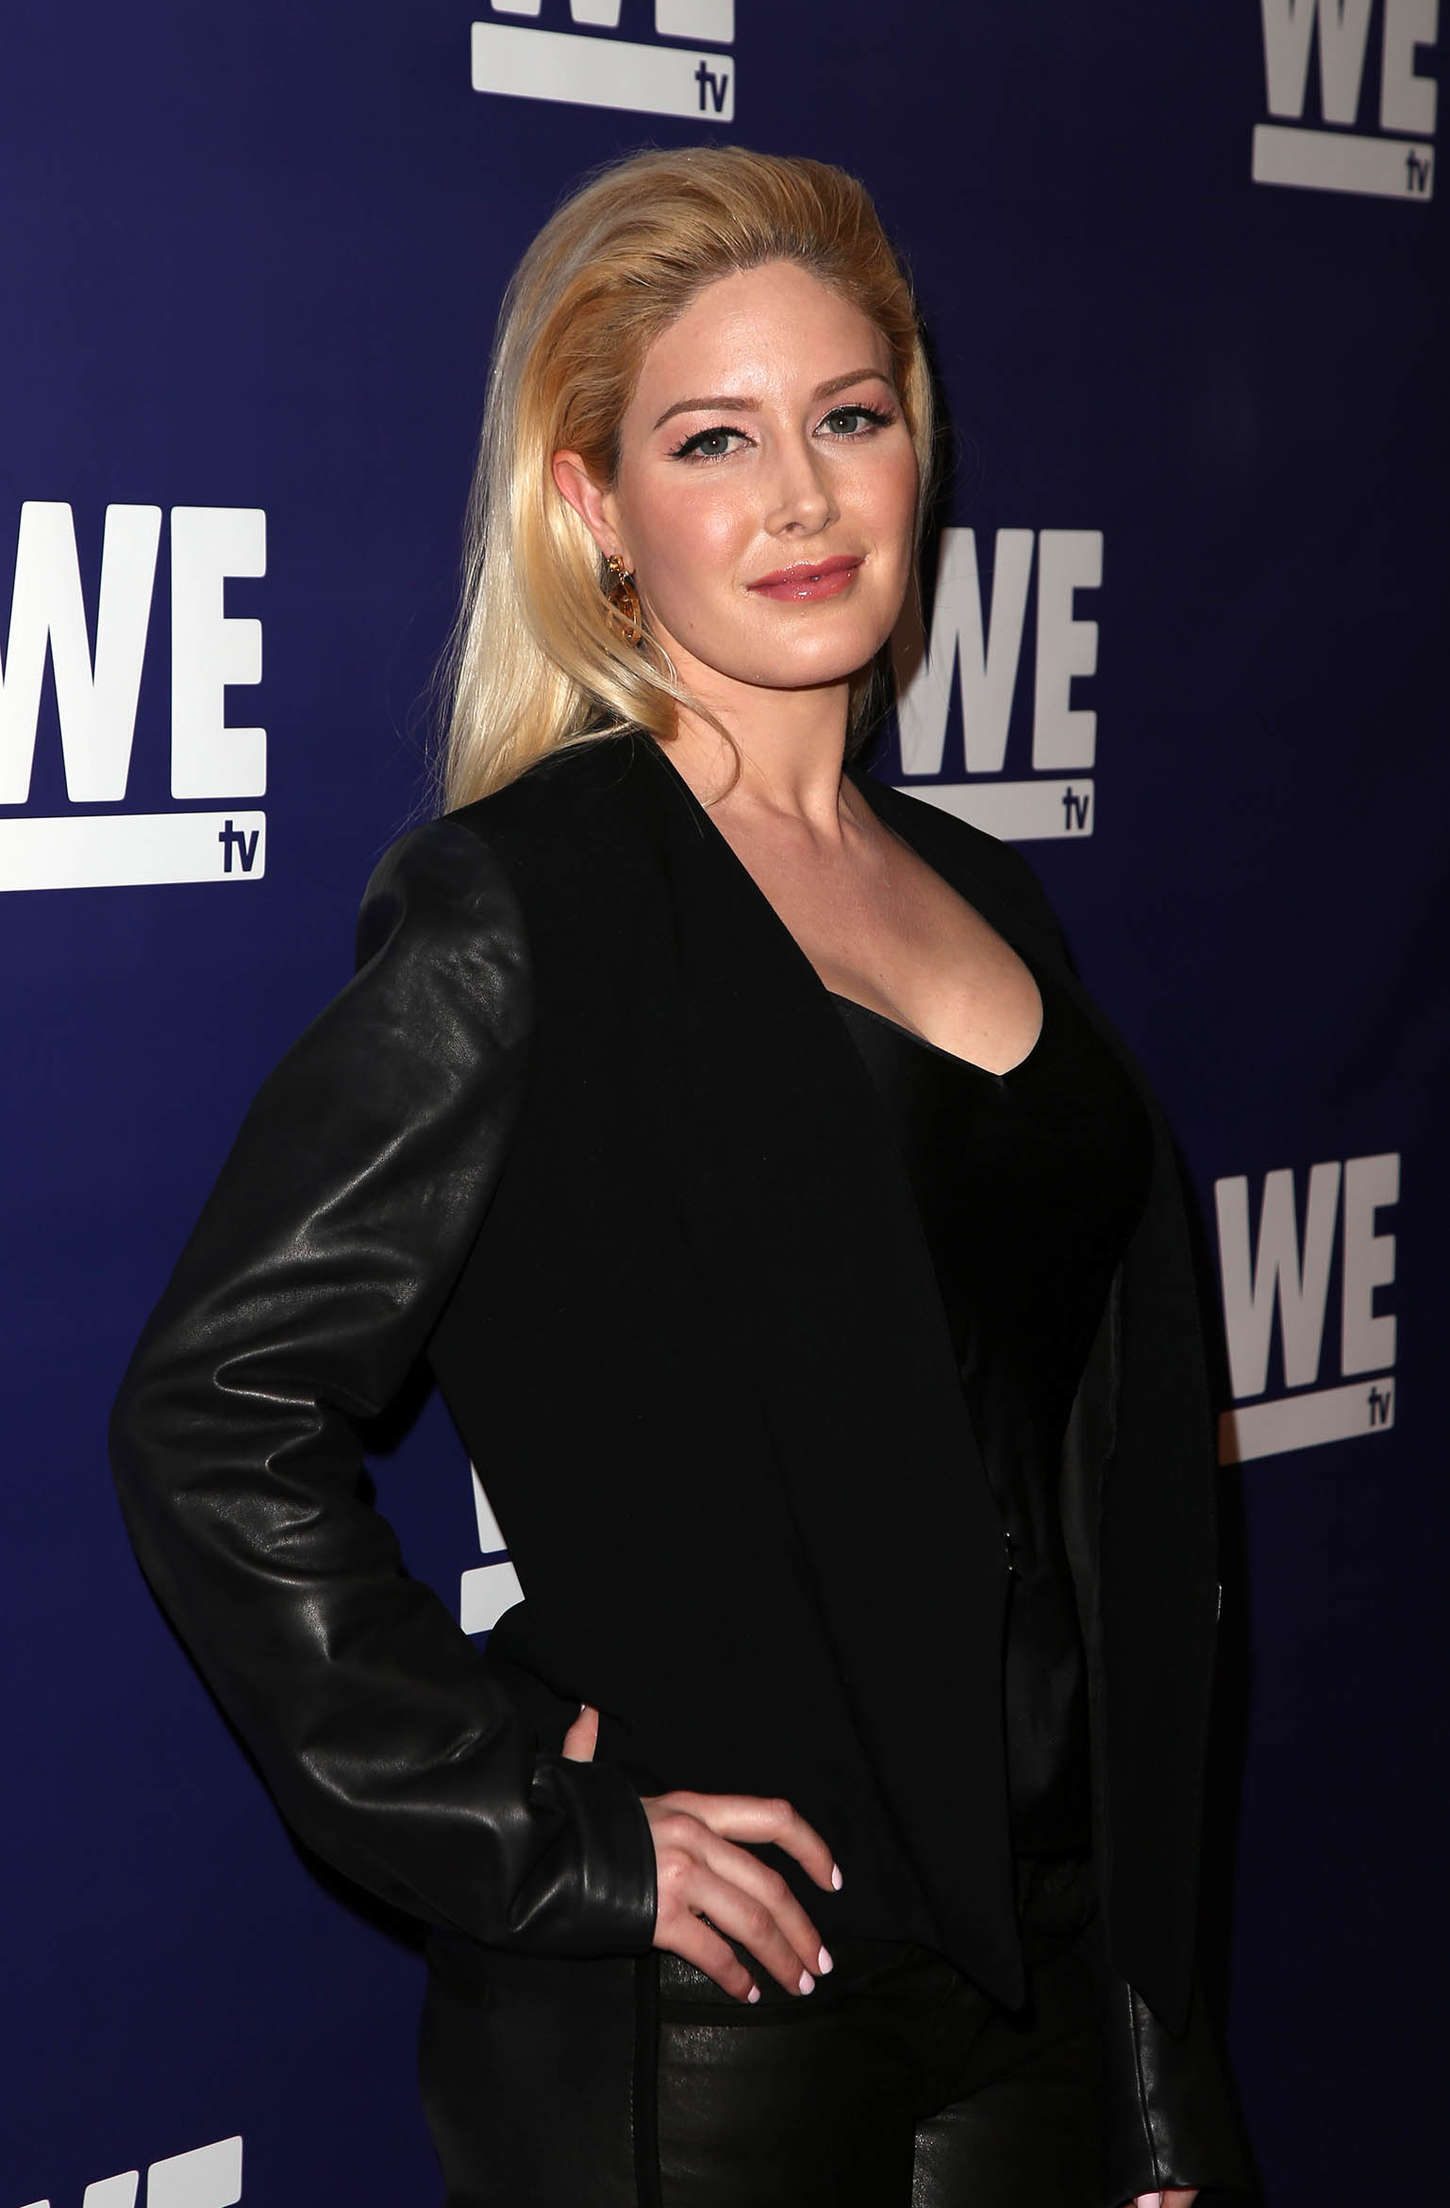 Heidi Montag attends the The Evolution of The Relationship Reality Show